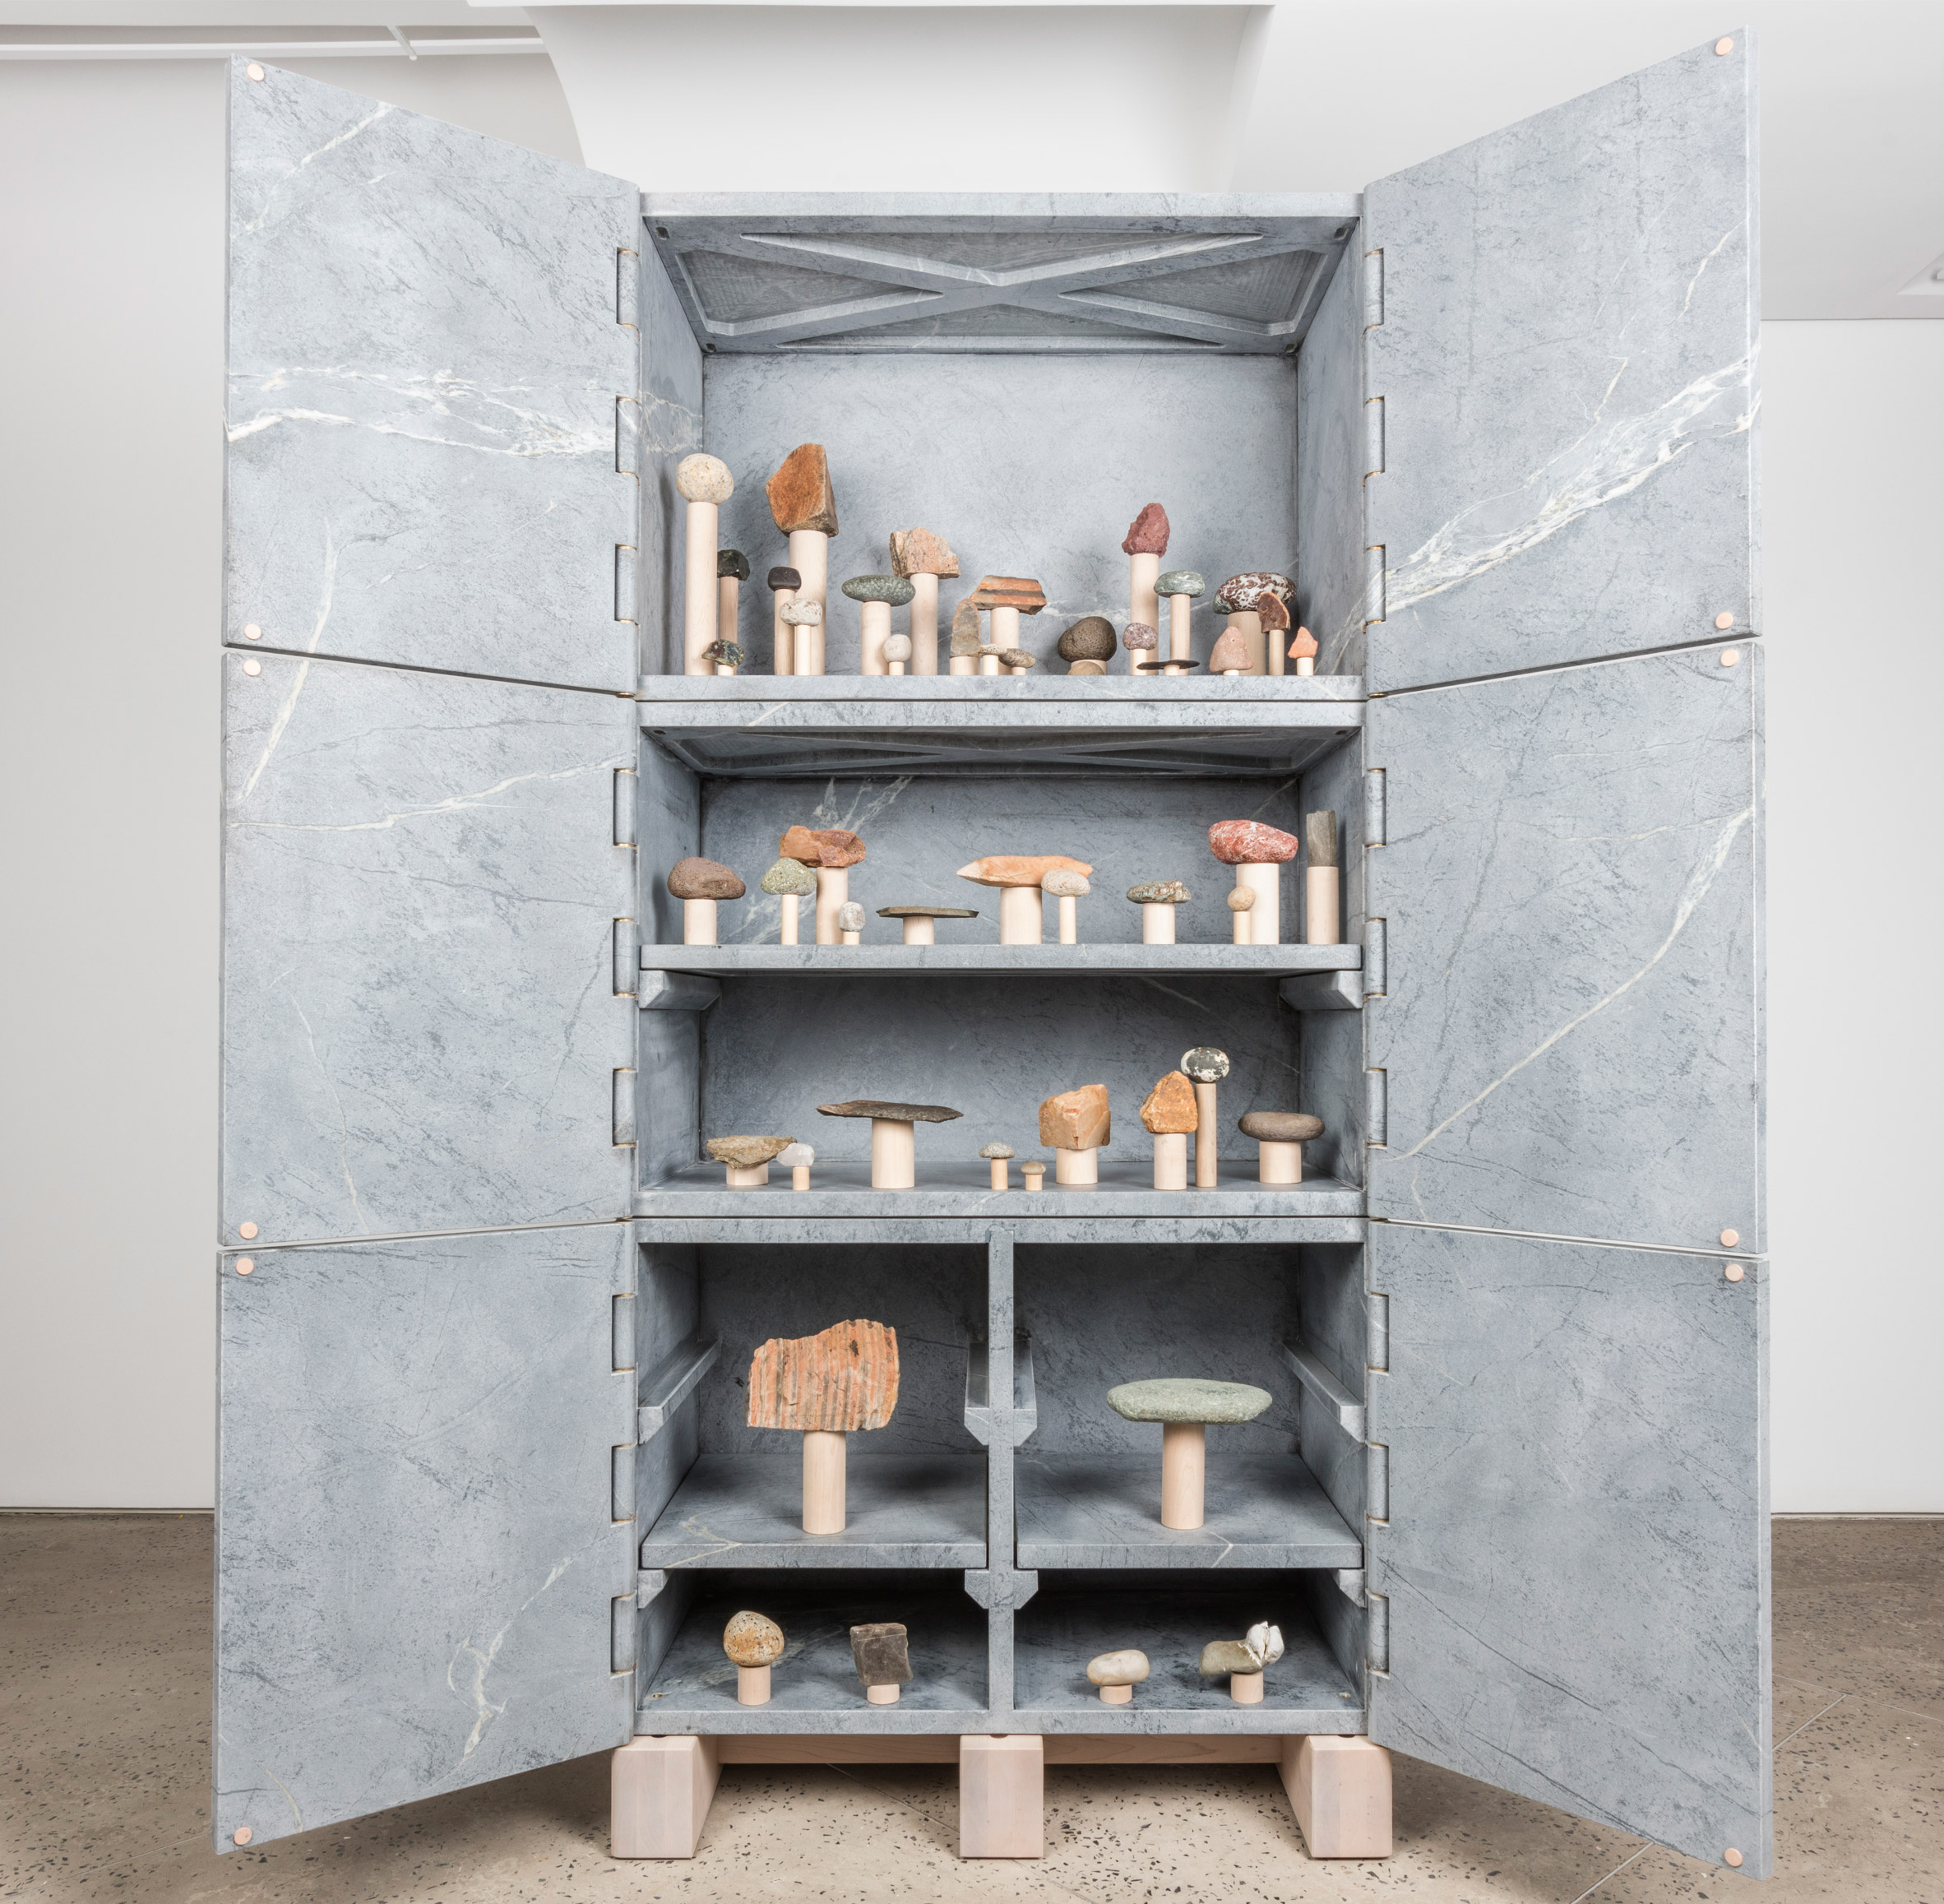 Of Cabinets and Curiosities exhibition at Chamber